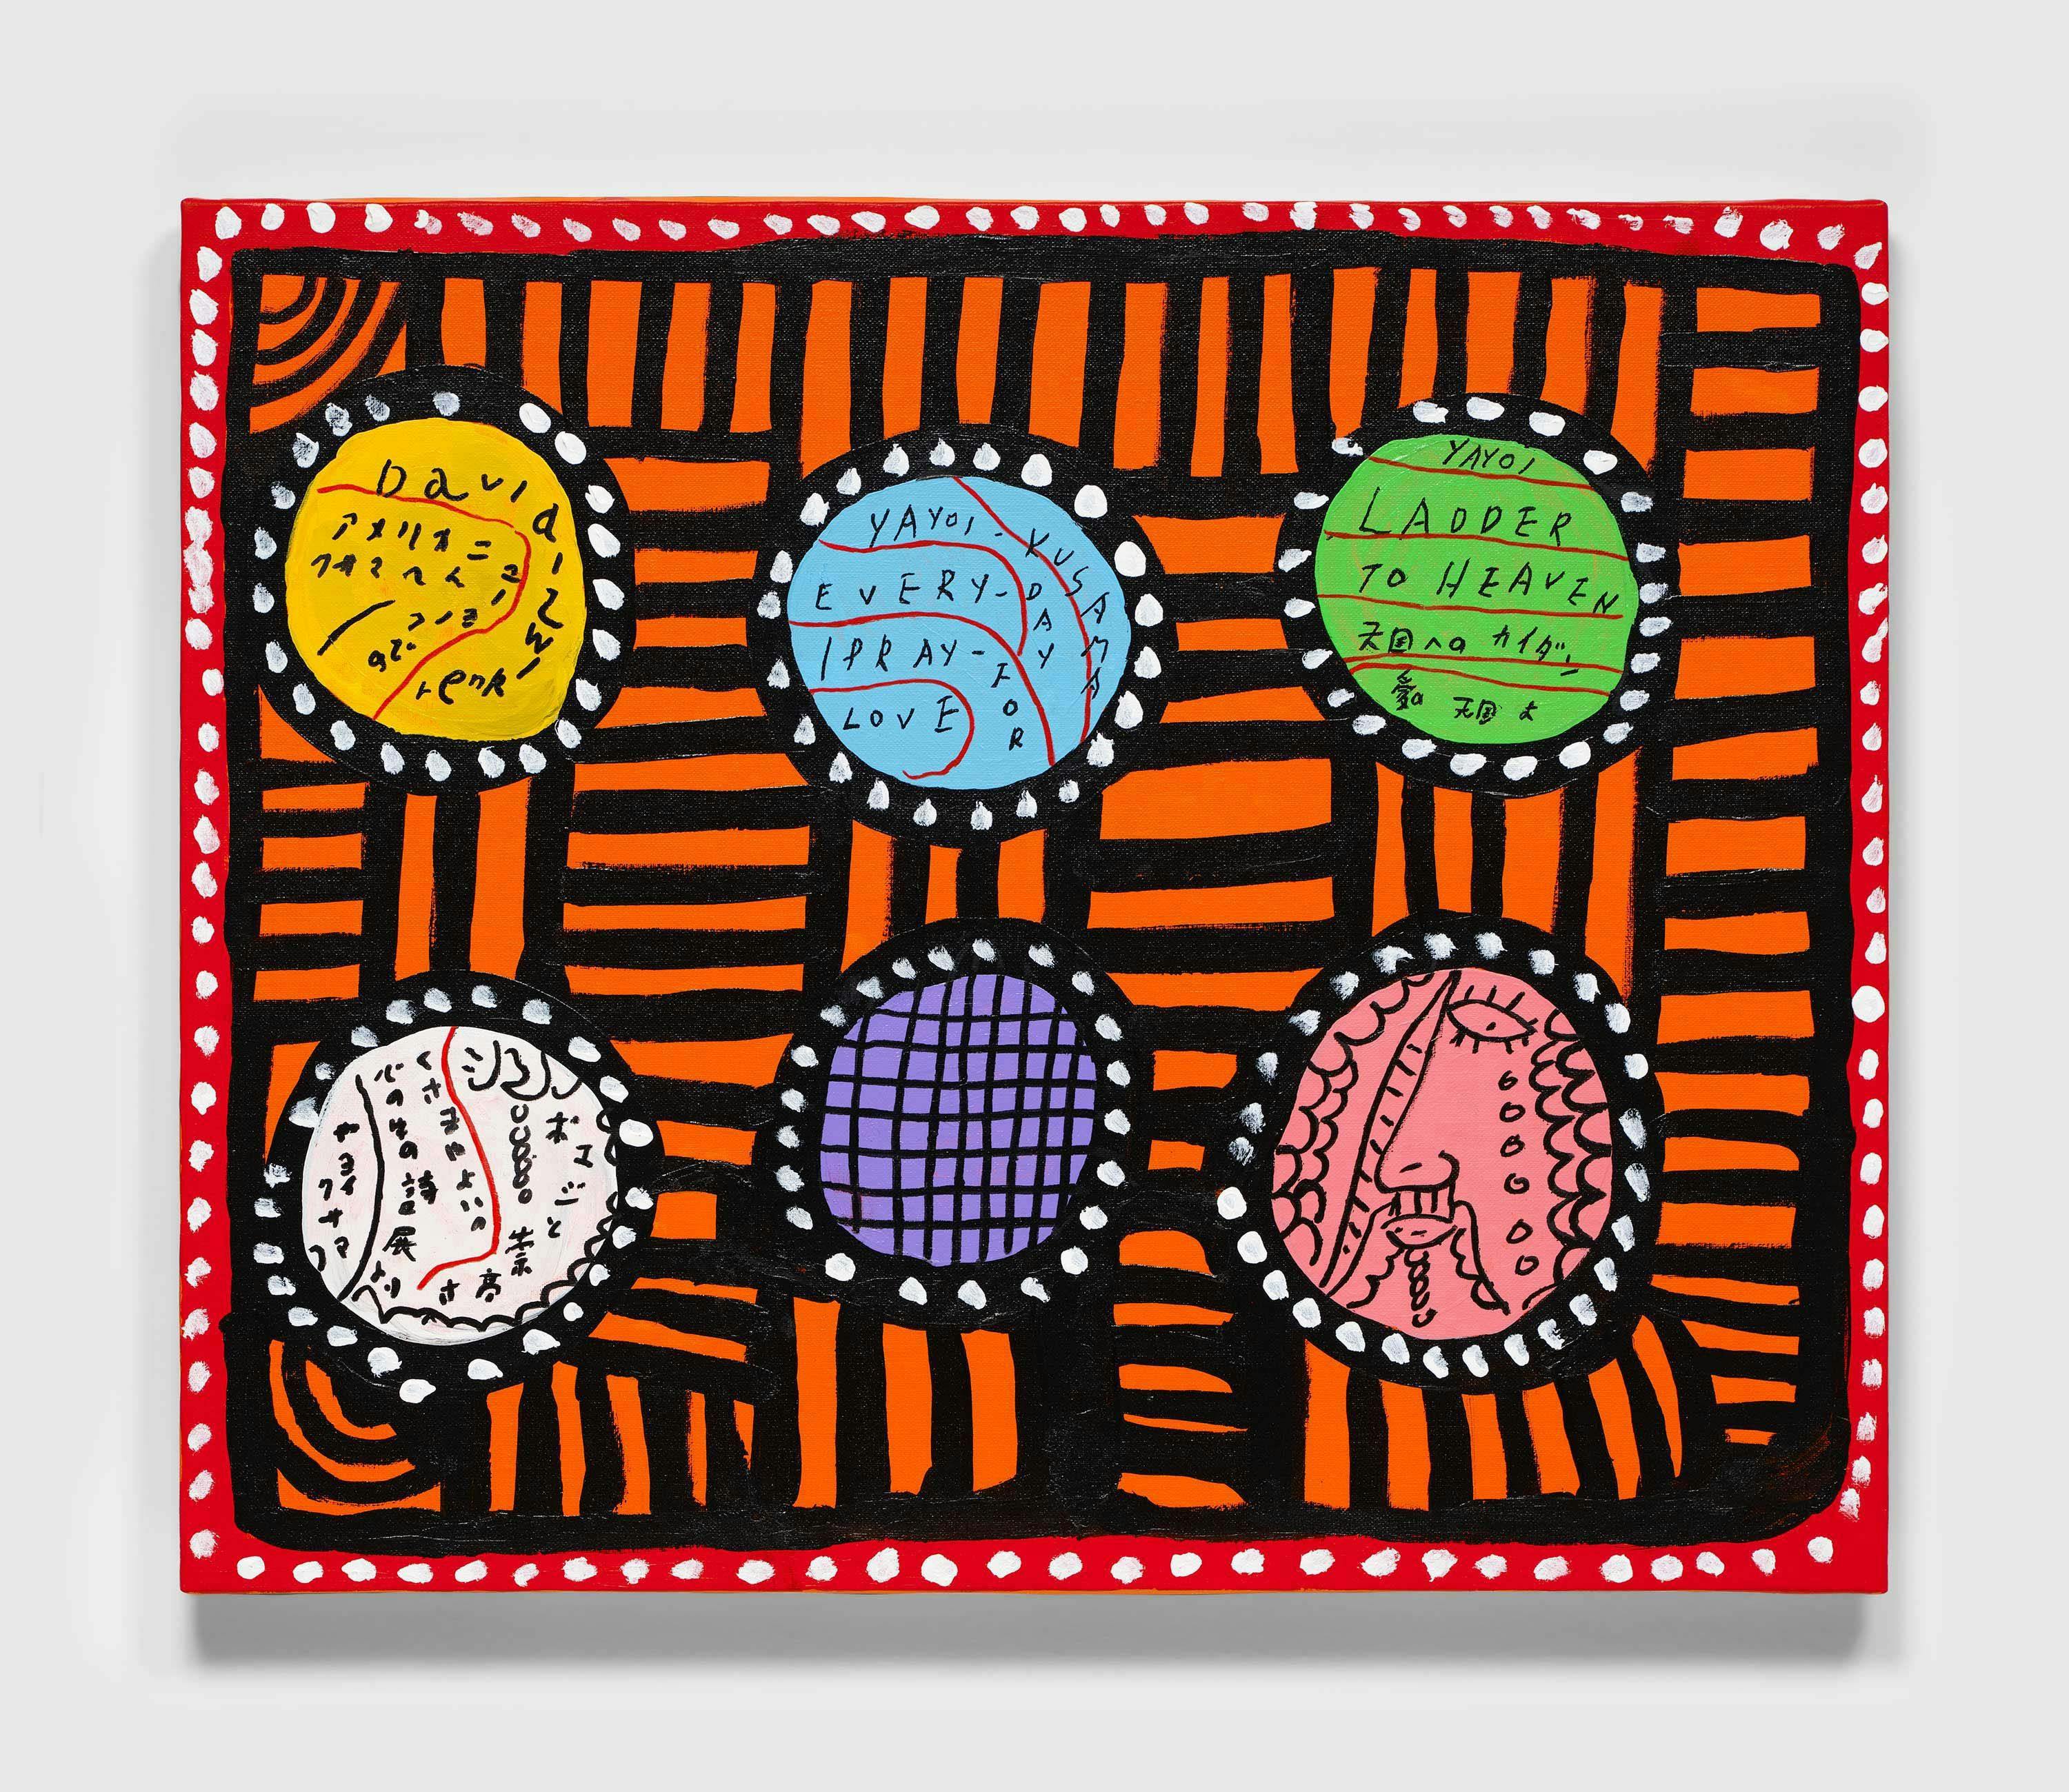 A painting by Yayoi Kusama, titled EVERY DAY I PRAY FOR LOVE, dated 2023.